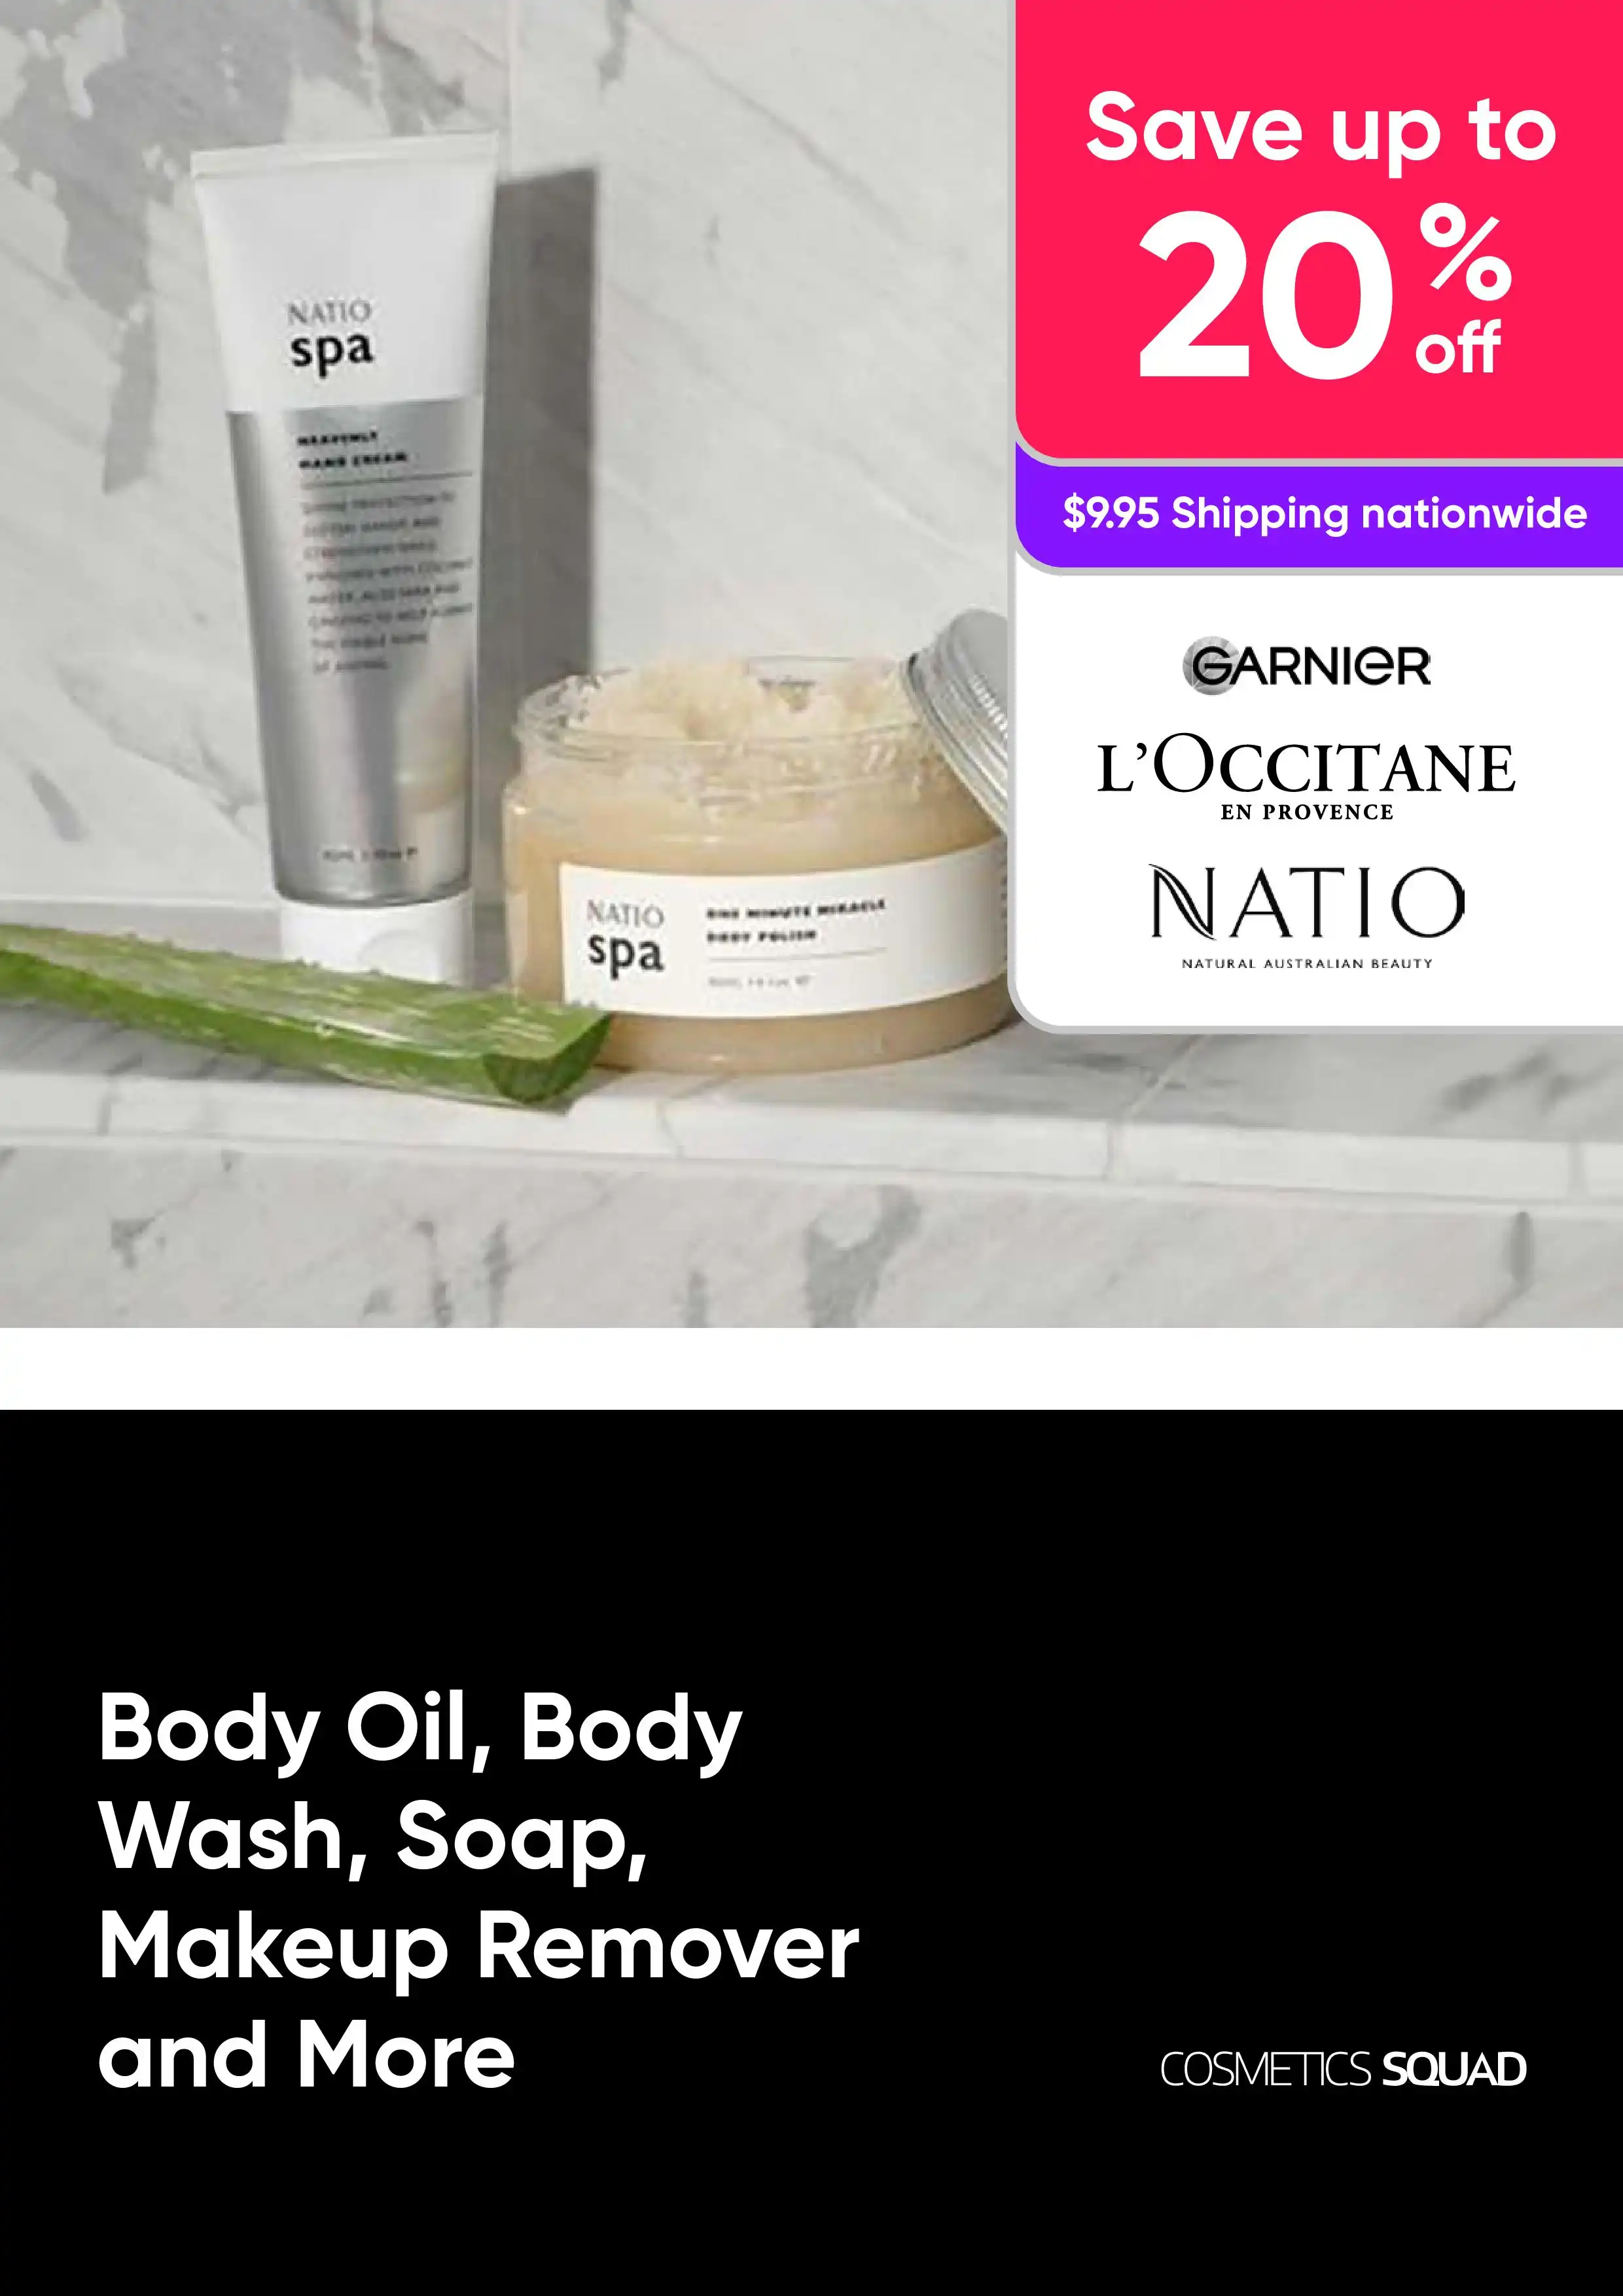 Body Cleaning Sale - Soap, Makeup Remover and More - Garnier, L'Occitane, Natio - Deals from $10